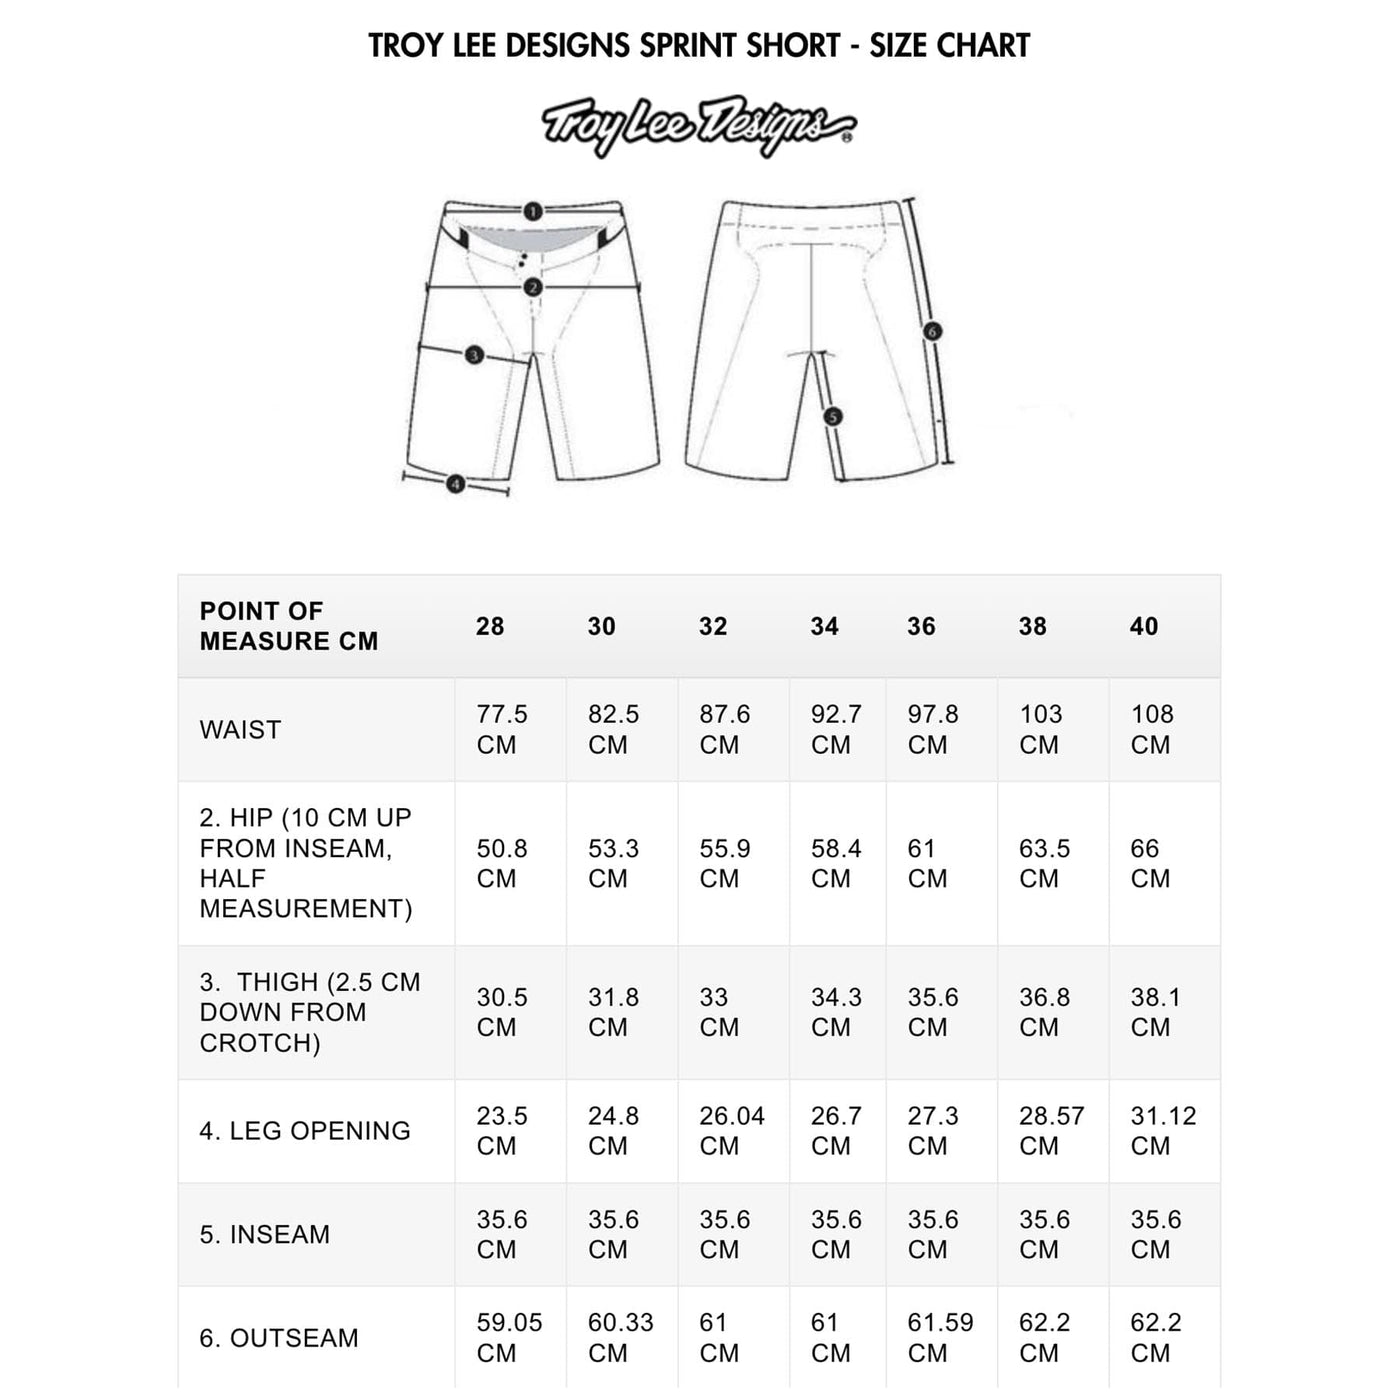 TROY LEE DESIGNS SPRINT SHORT - SIZE CHART | 8Lines.eu - fast shipping